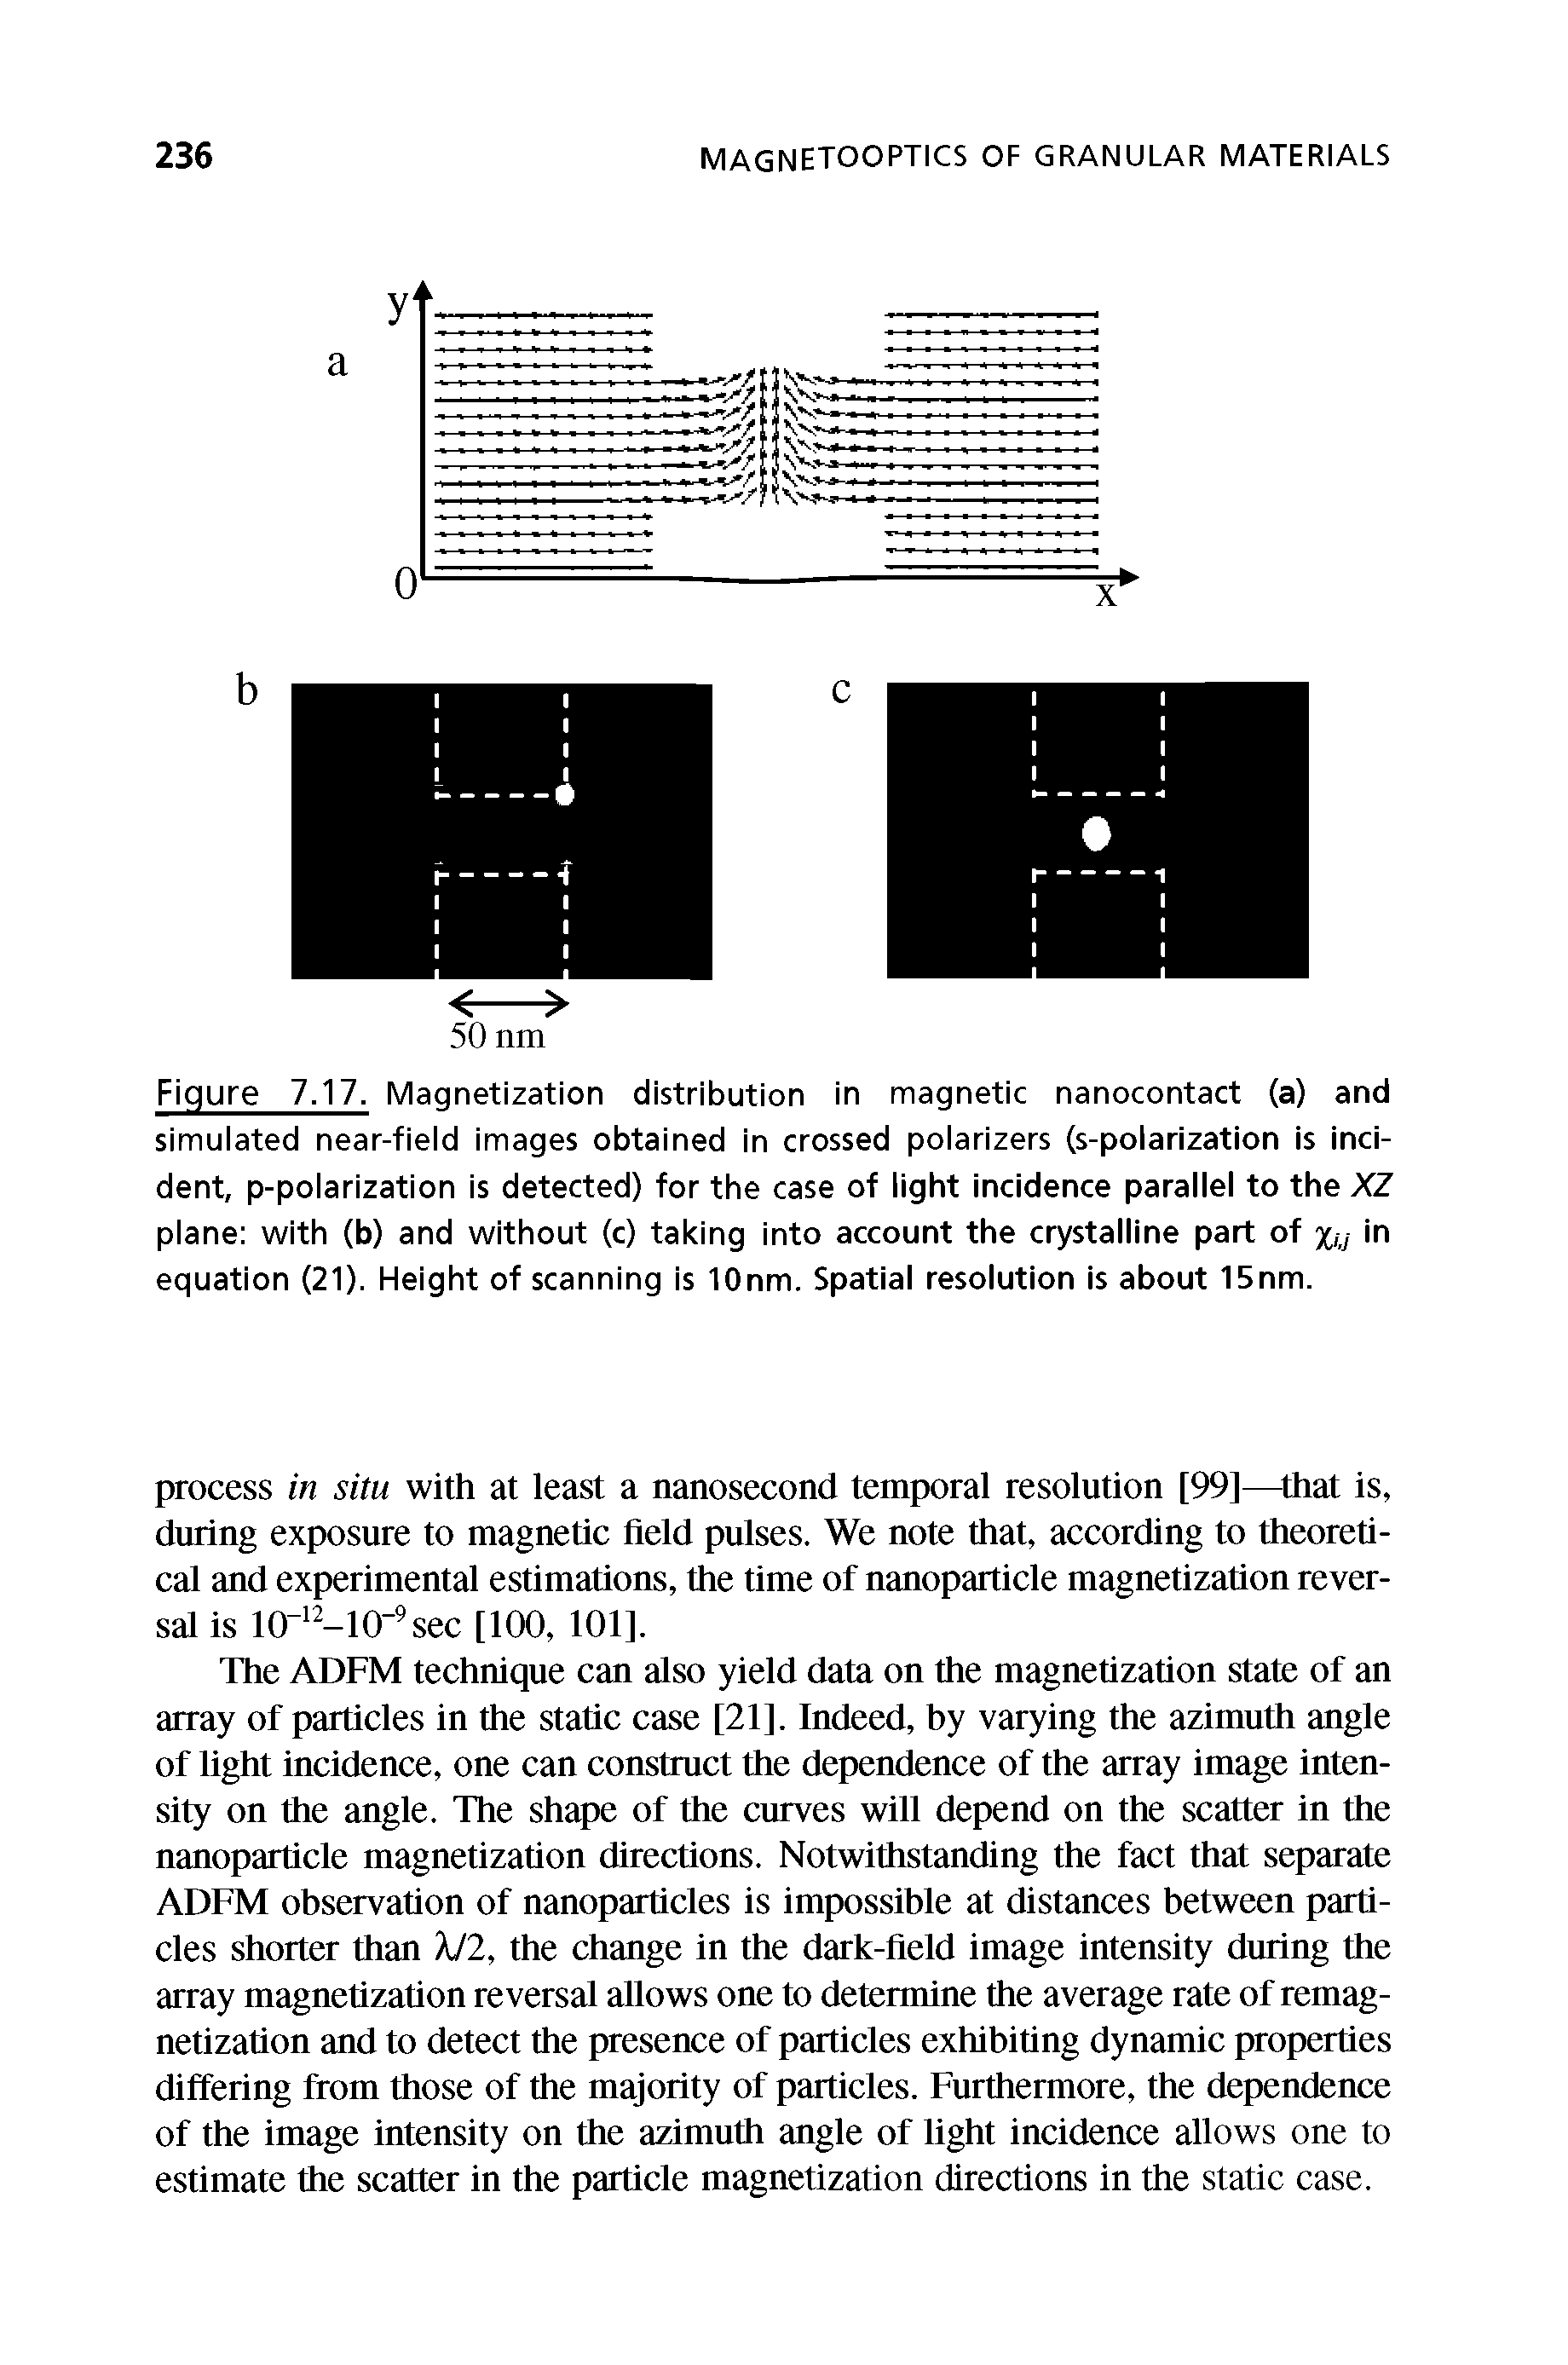 Figure 7.17. Magnetization distribution in magnetic nanocontact (a) and simulated near-field images obtained in crossed polarizers (s-polarization is incident, p-polarization is detected) for the case of light incidence parallel to the XZ plane with (b) and without (c) taking into account the crystalline part of %,j in equation (21). Height of scanning is lOnm. Spatial resolution is about 15nm.